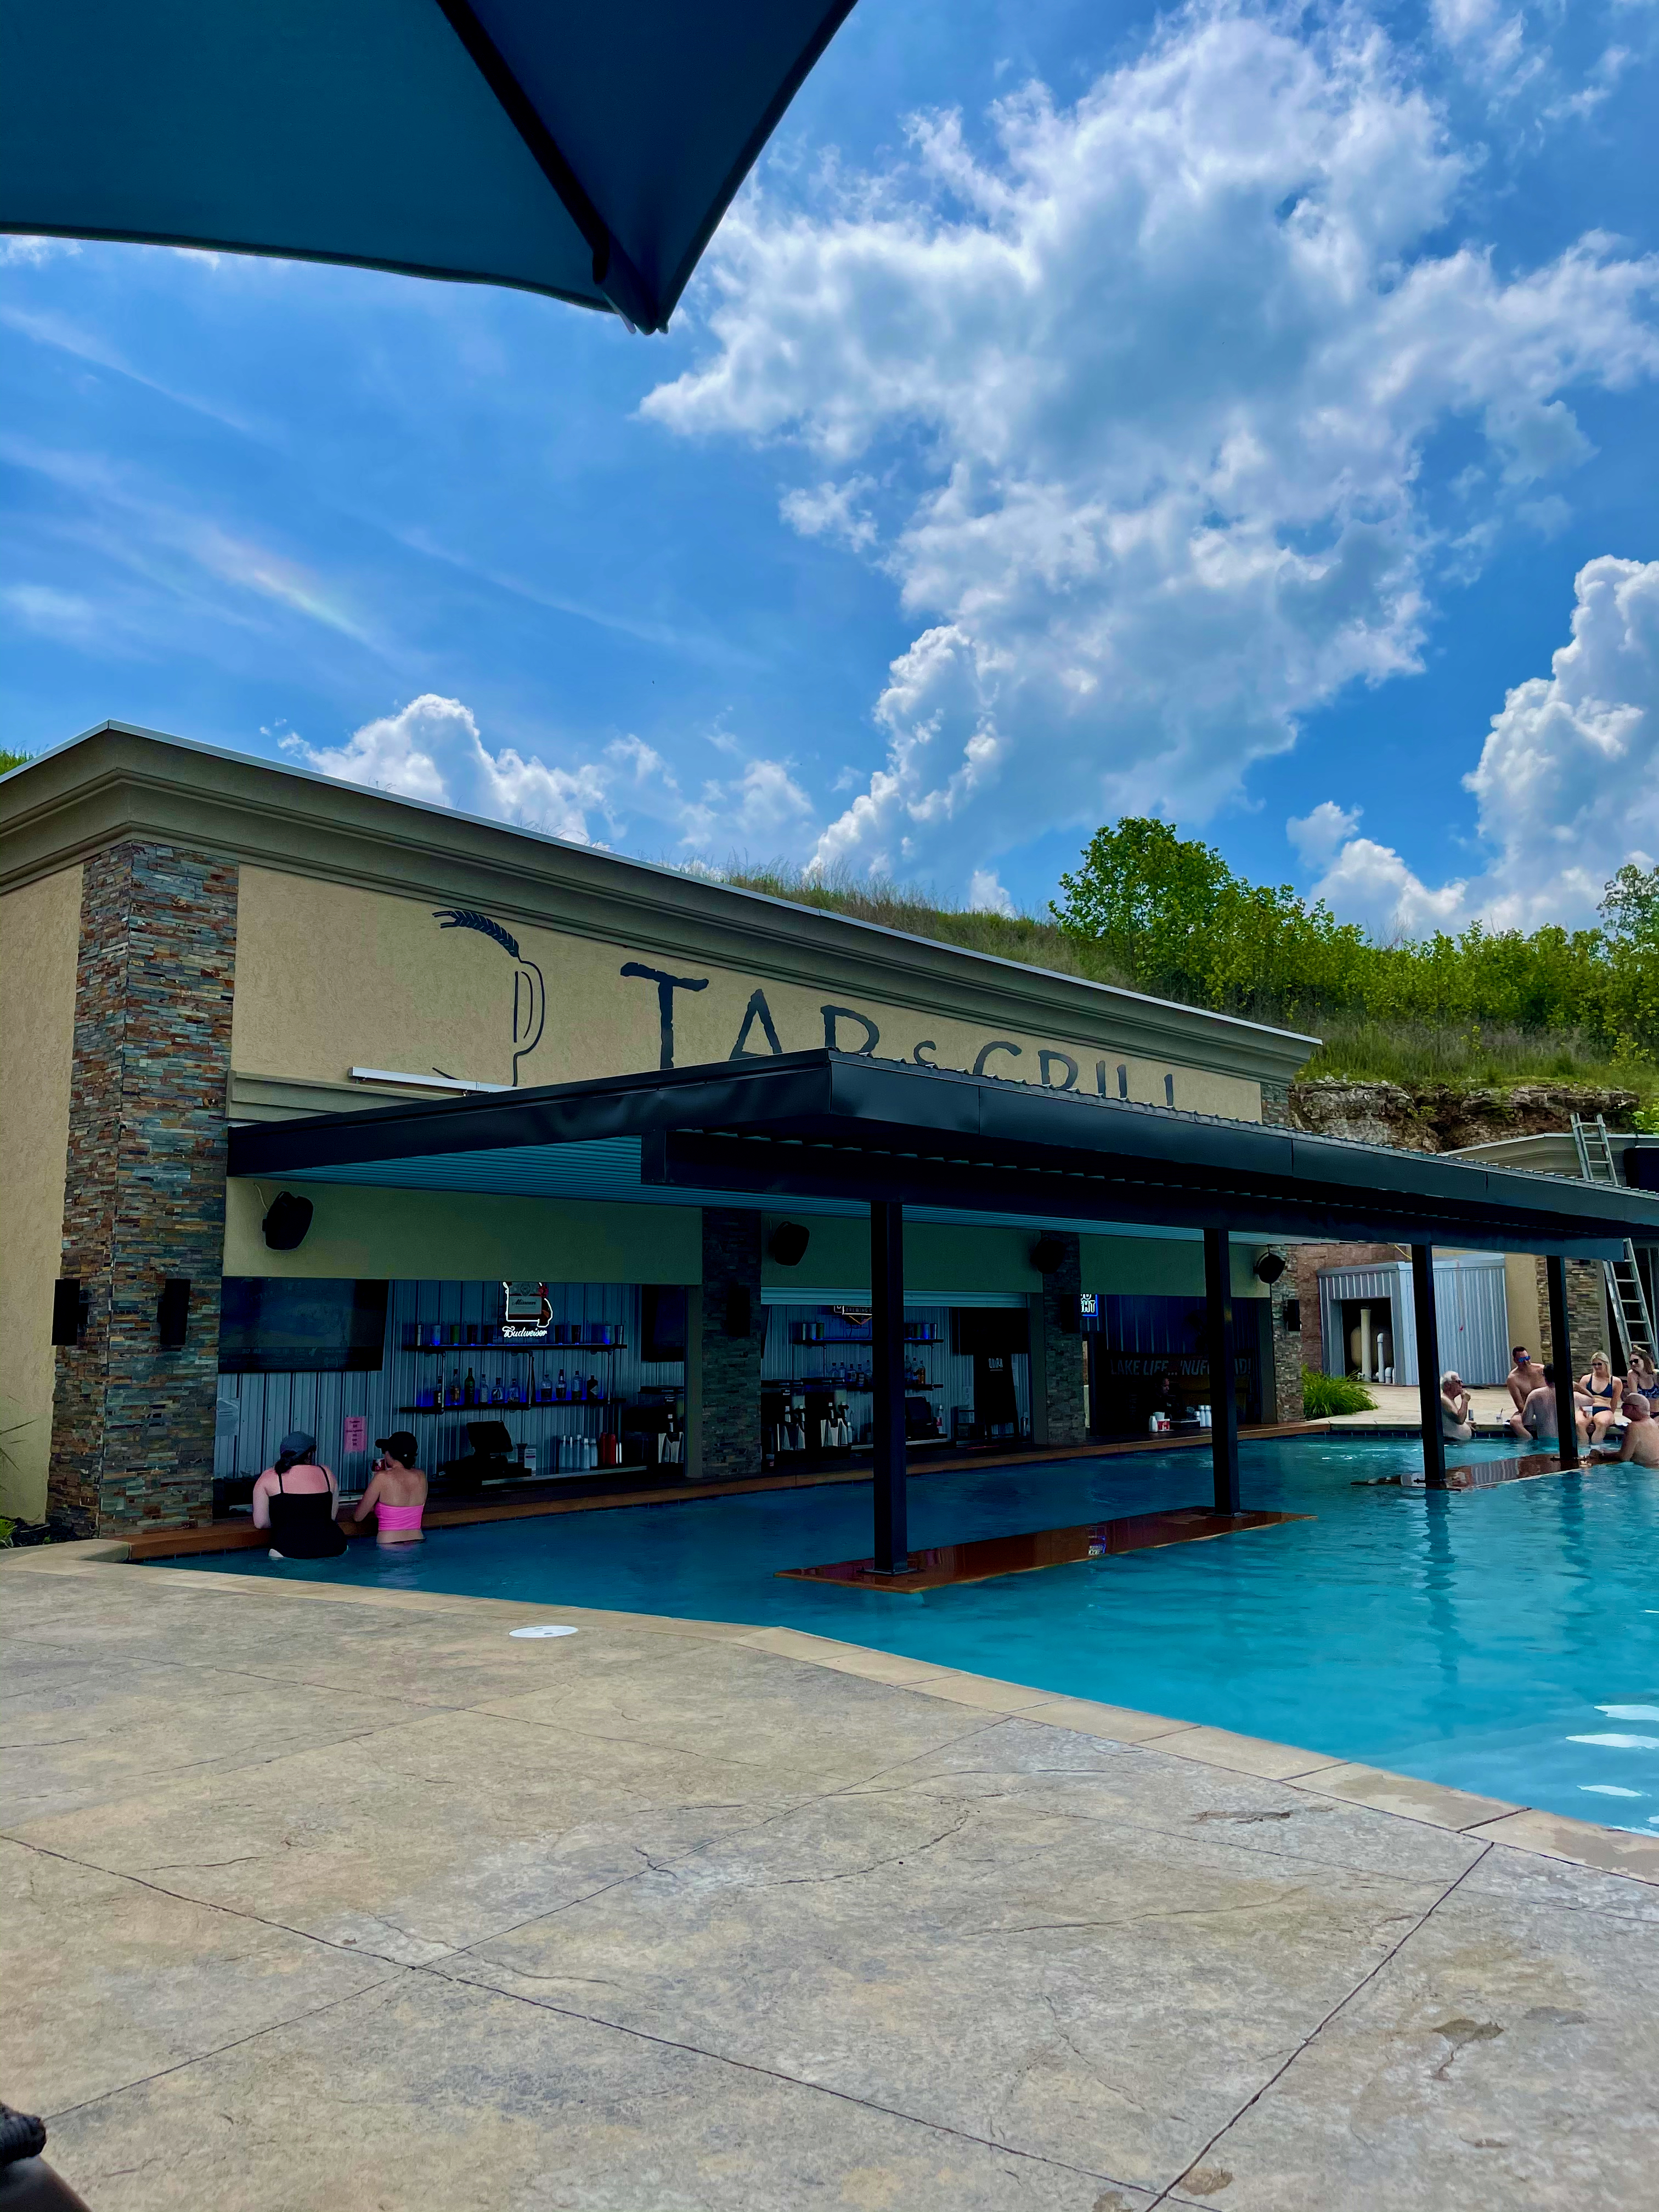 View of the Tap & Grill pool bar